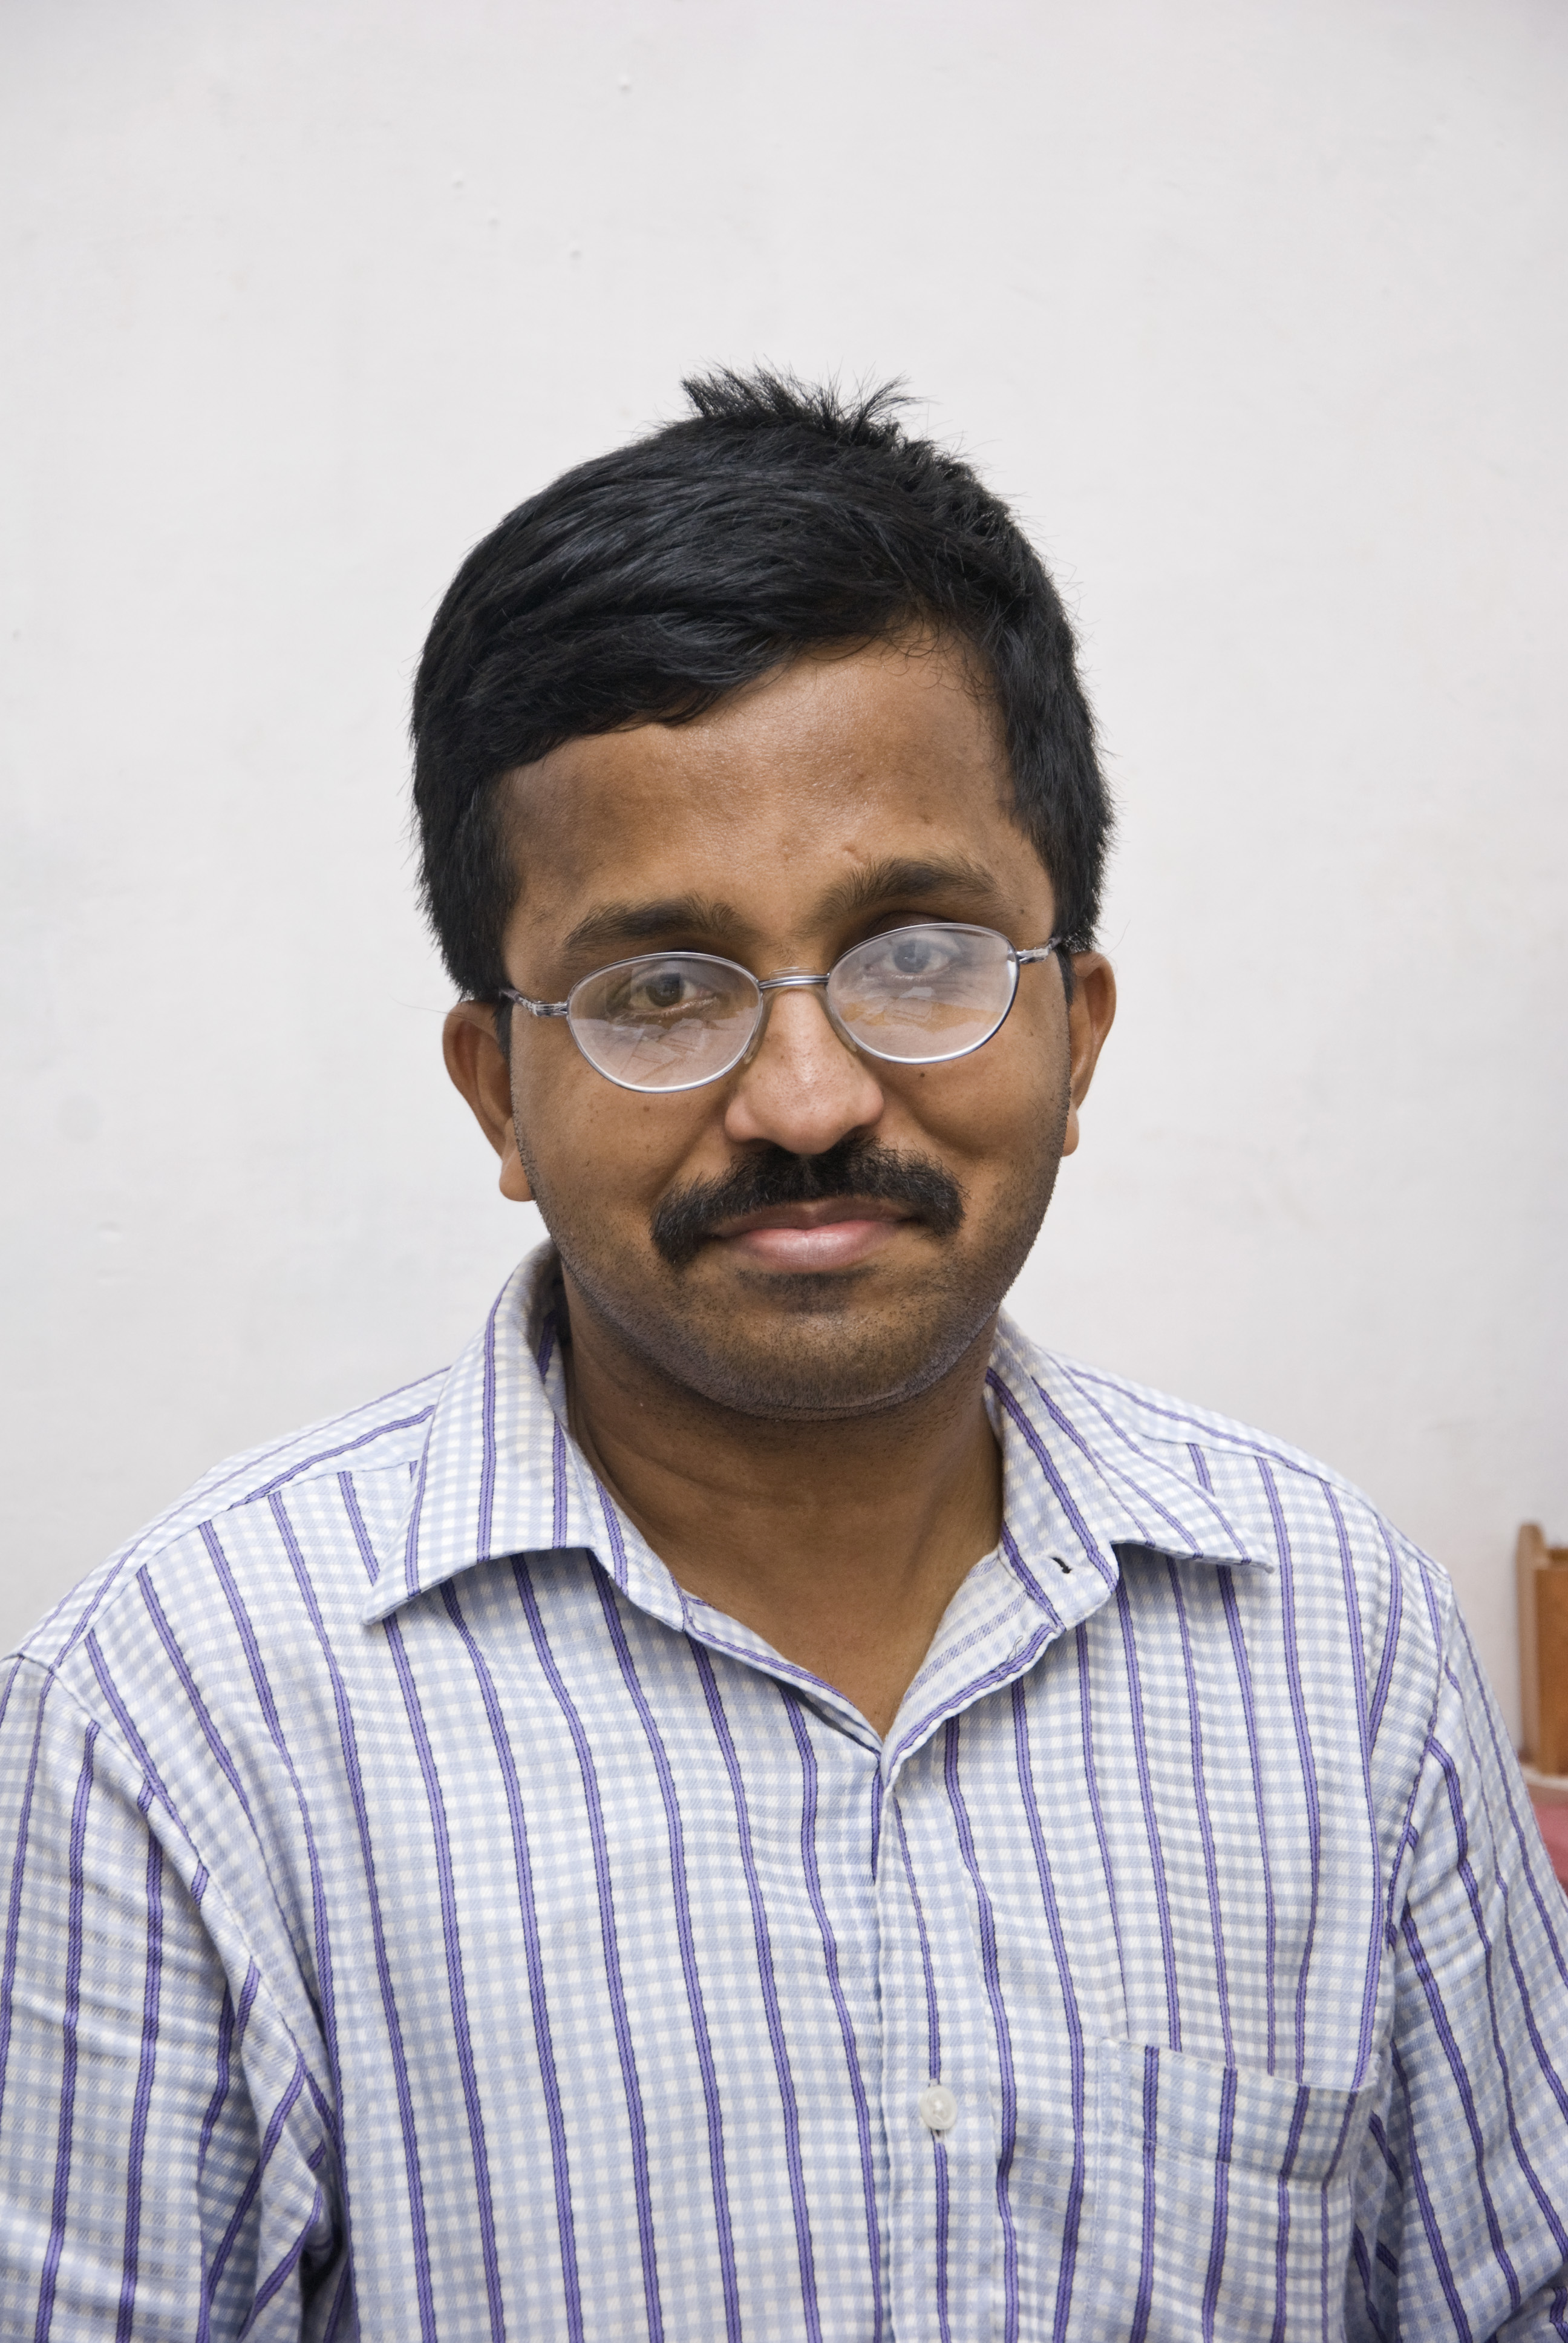 Avelino started Disability Rights Association of Goa in 2003 to resolve issues related to disablity